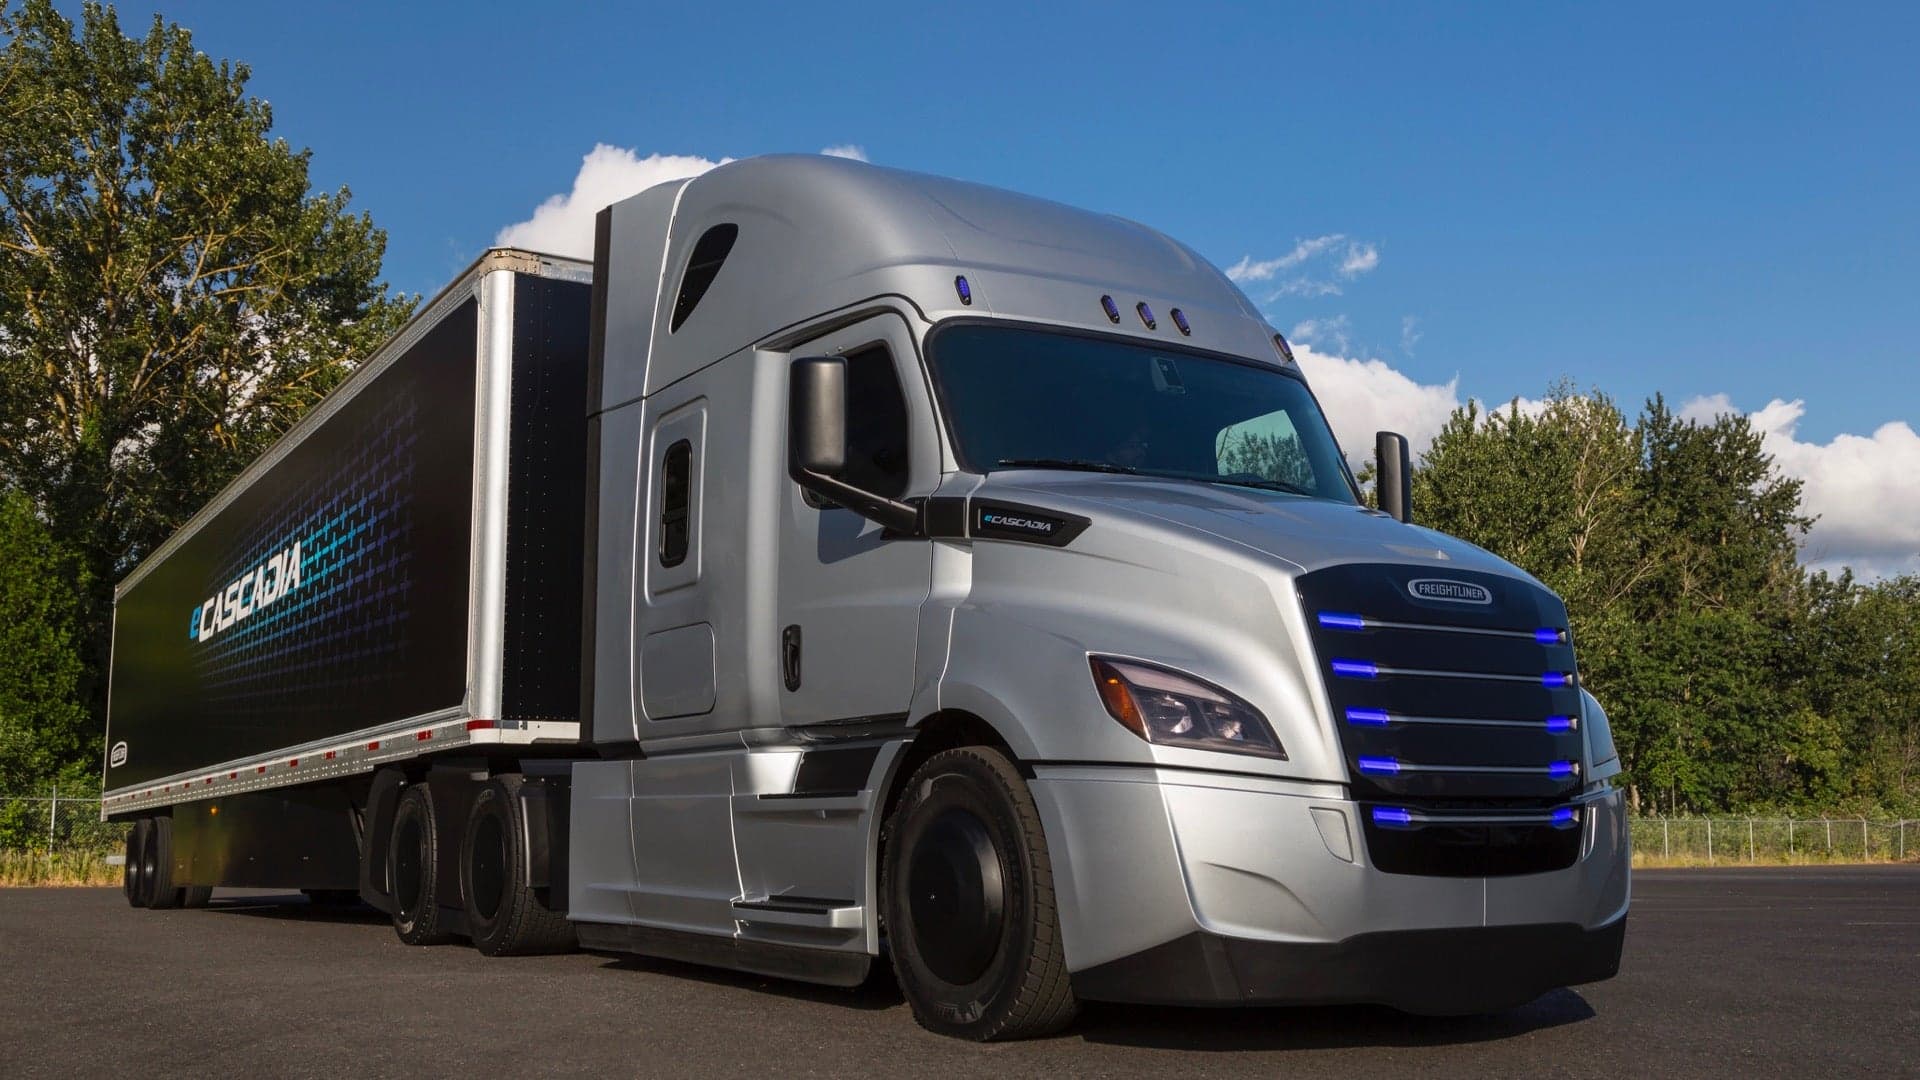 Freightliner Deploys Test Fleet of 30 Electric Trucks With US Customers